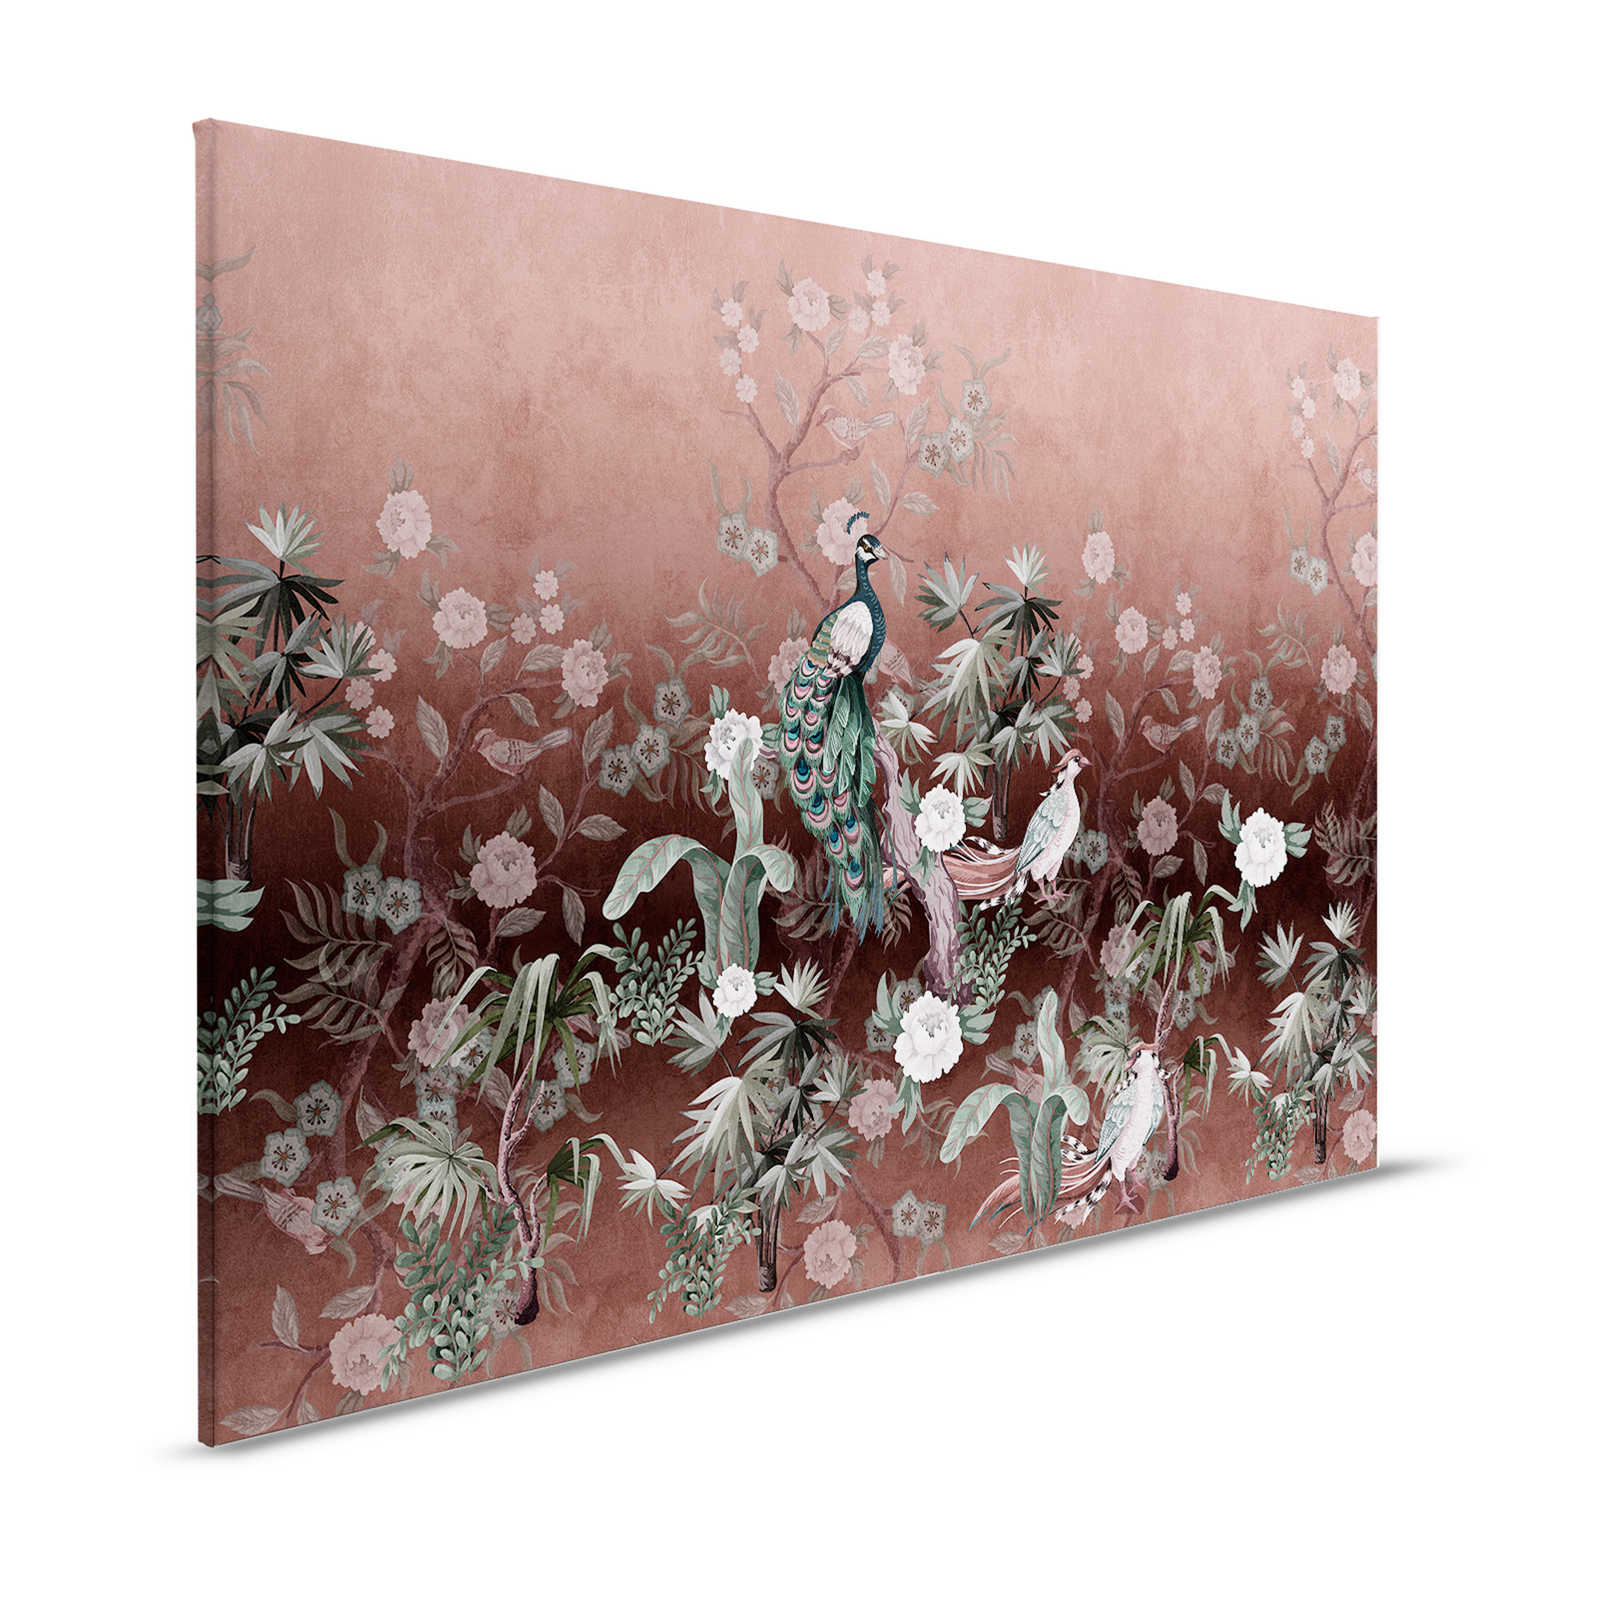 Peacock Island 1 - Canvas painting Peacock garden with flowers in old rose - 1,20 m x 0,80 m
